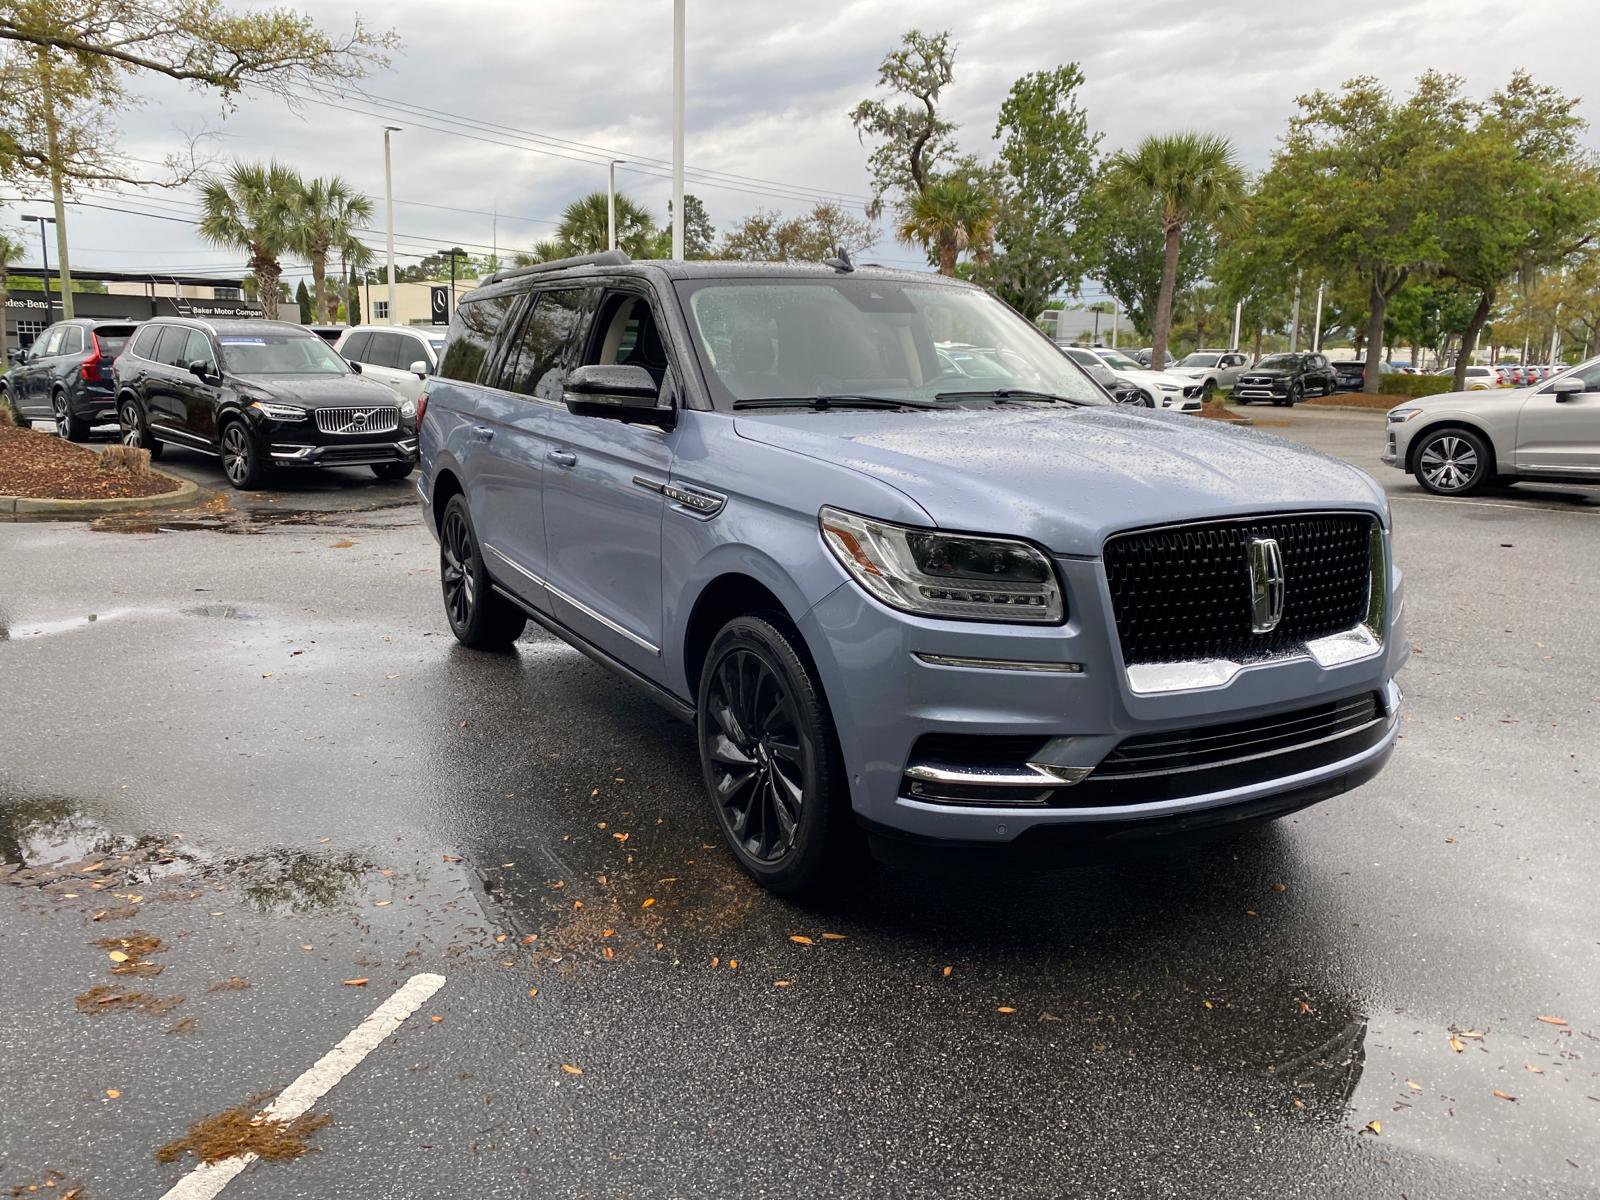 Pre-Owned 2021 Lincoln Navigator L Black Label 4×4 SUV in Cary #Q23430A |  Hendrick Dodge Cary